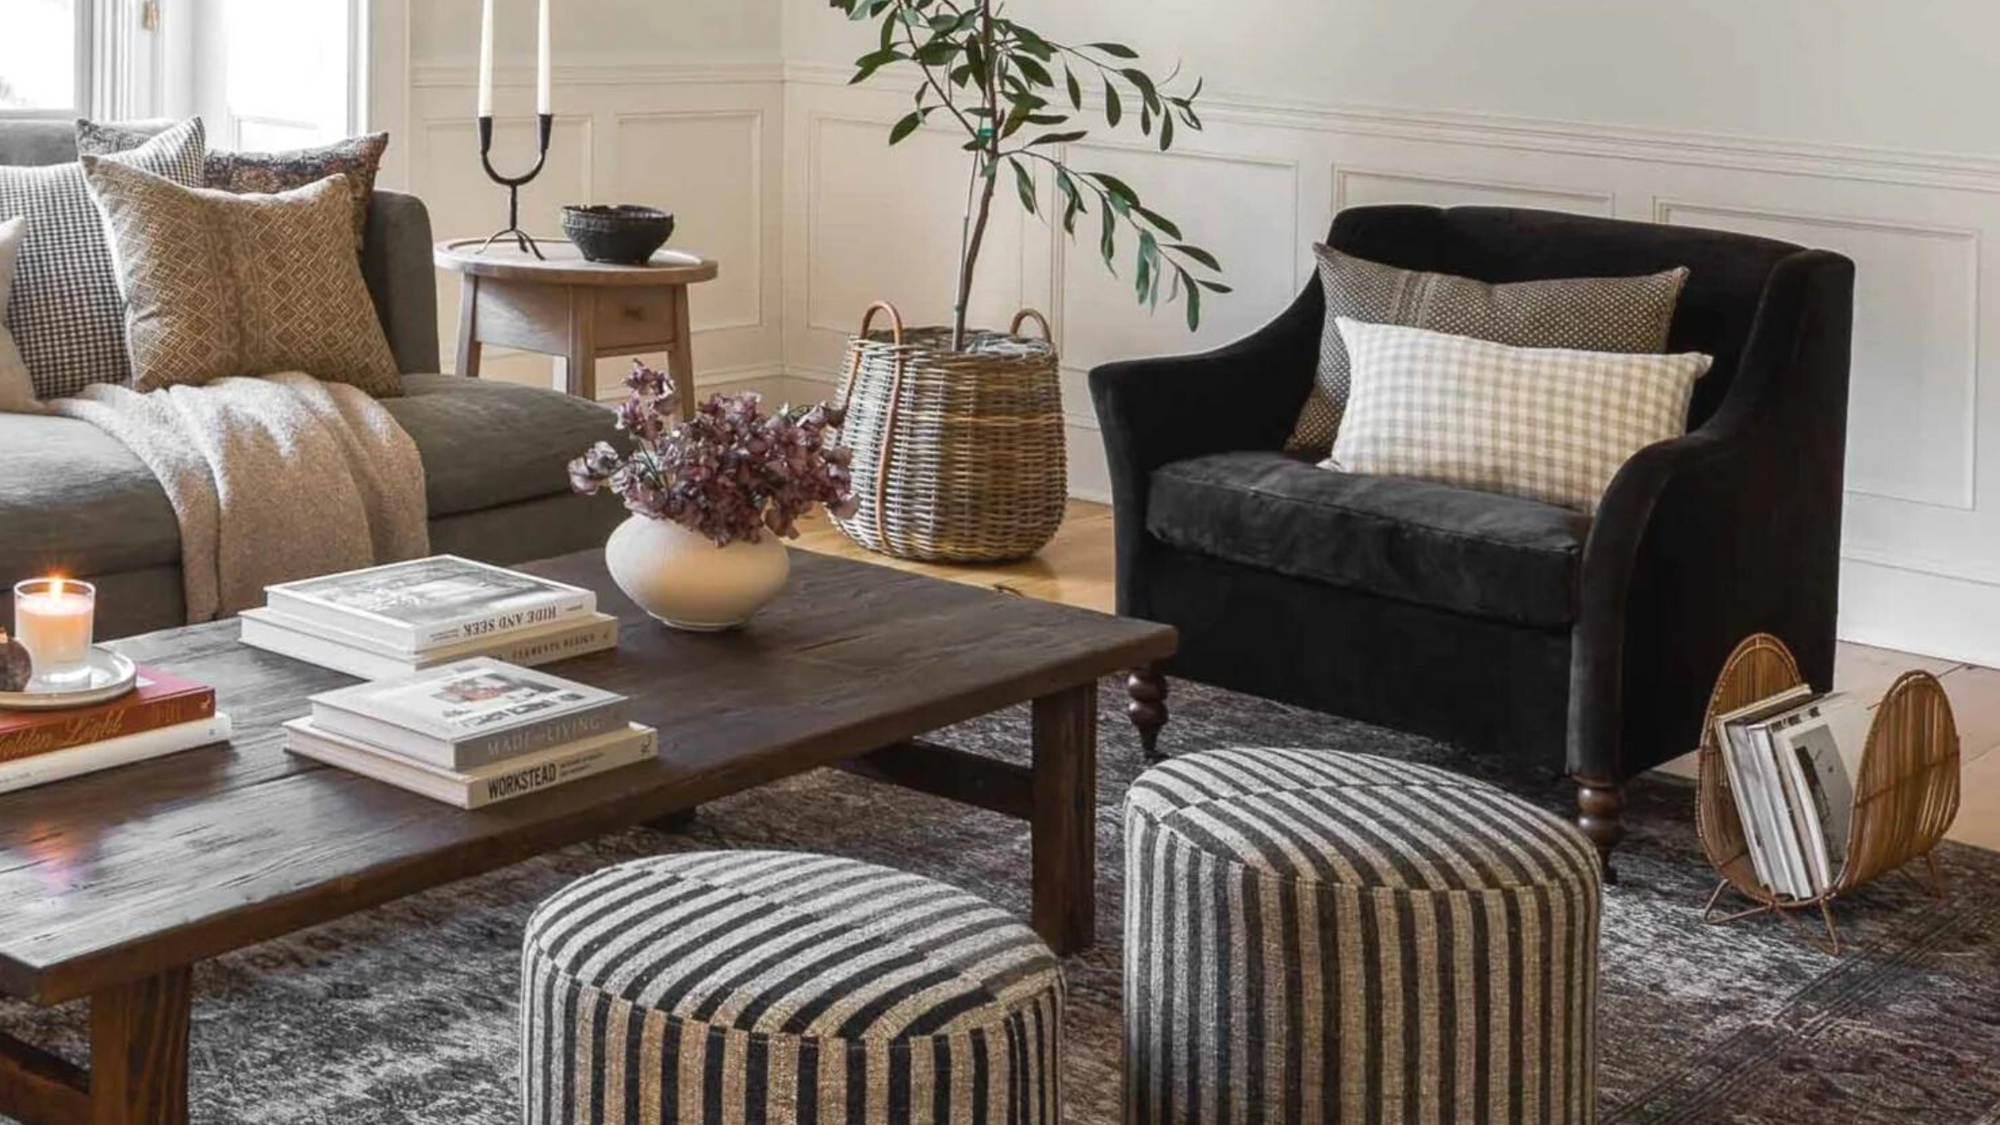 10 Tips to Create a Collected Home blog post. Living room scene with sofa, velvet accent chair, striped ottomans, and styled wooden coffee table with books, vases, and candles.